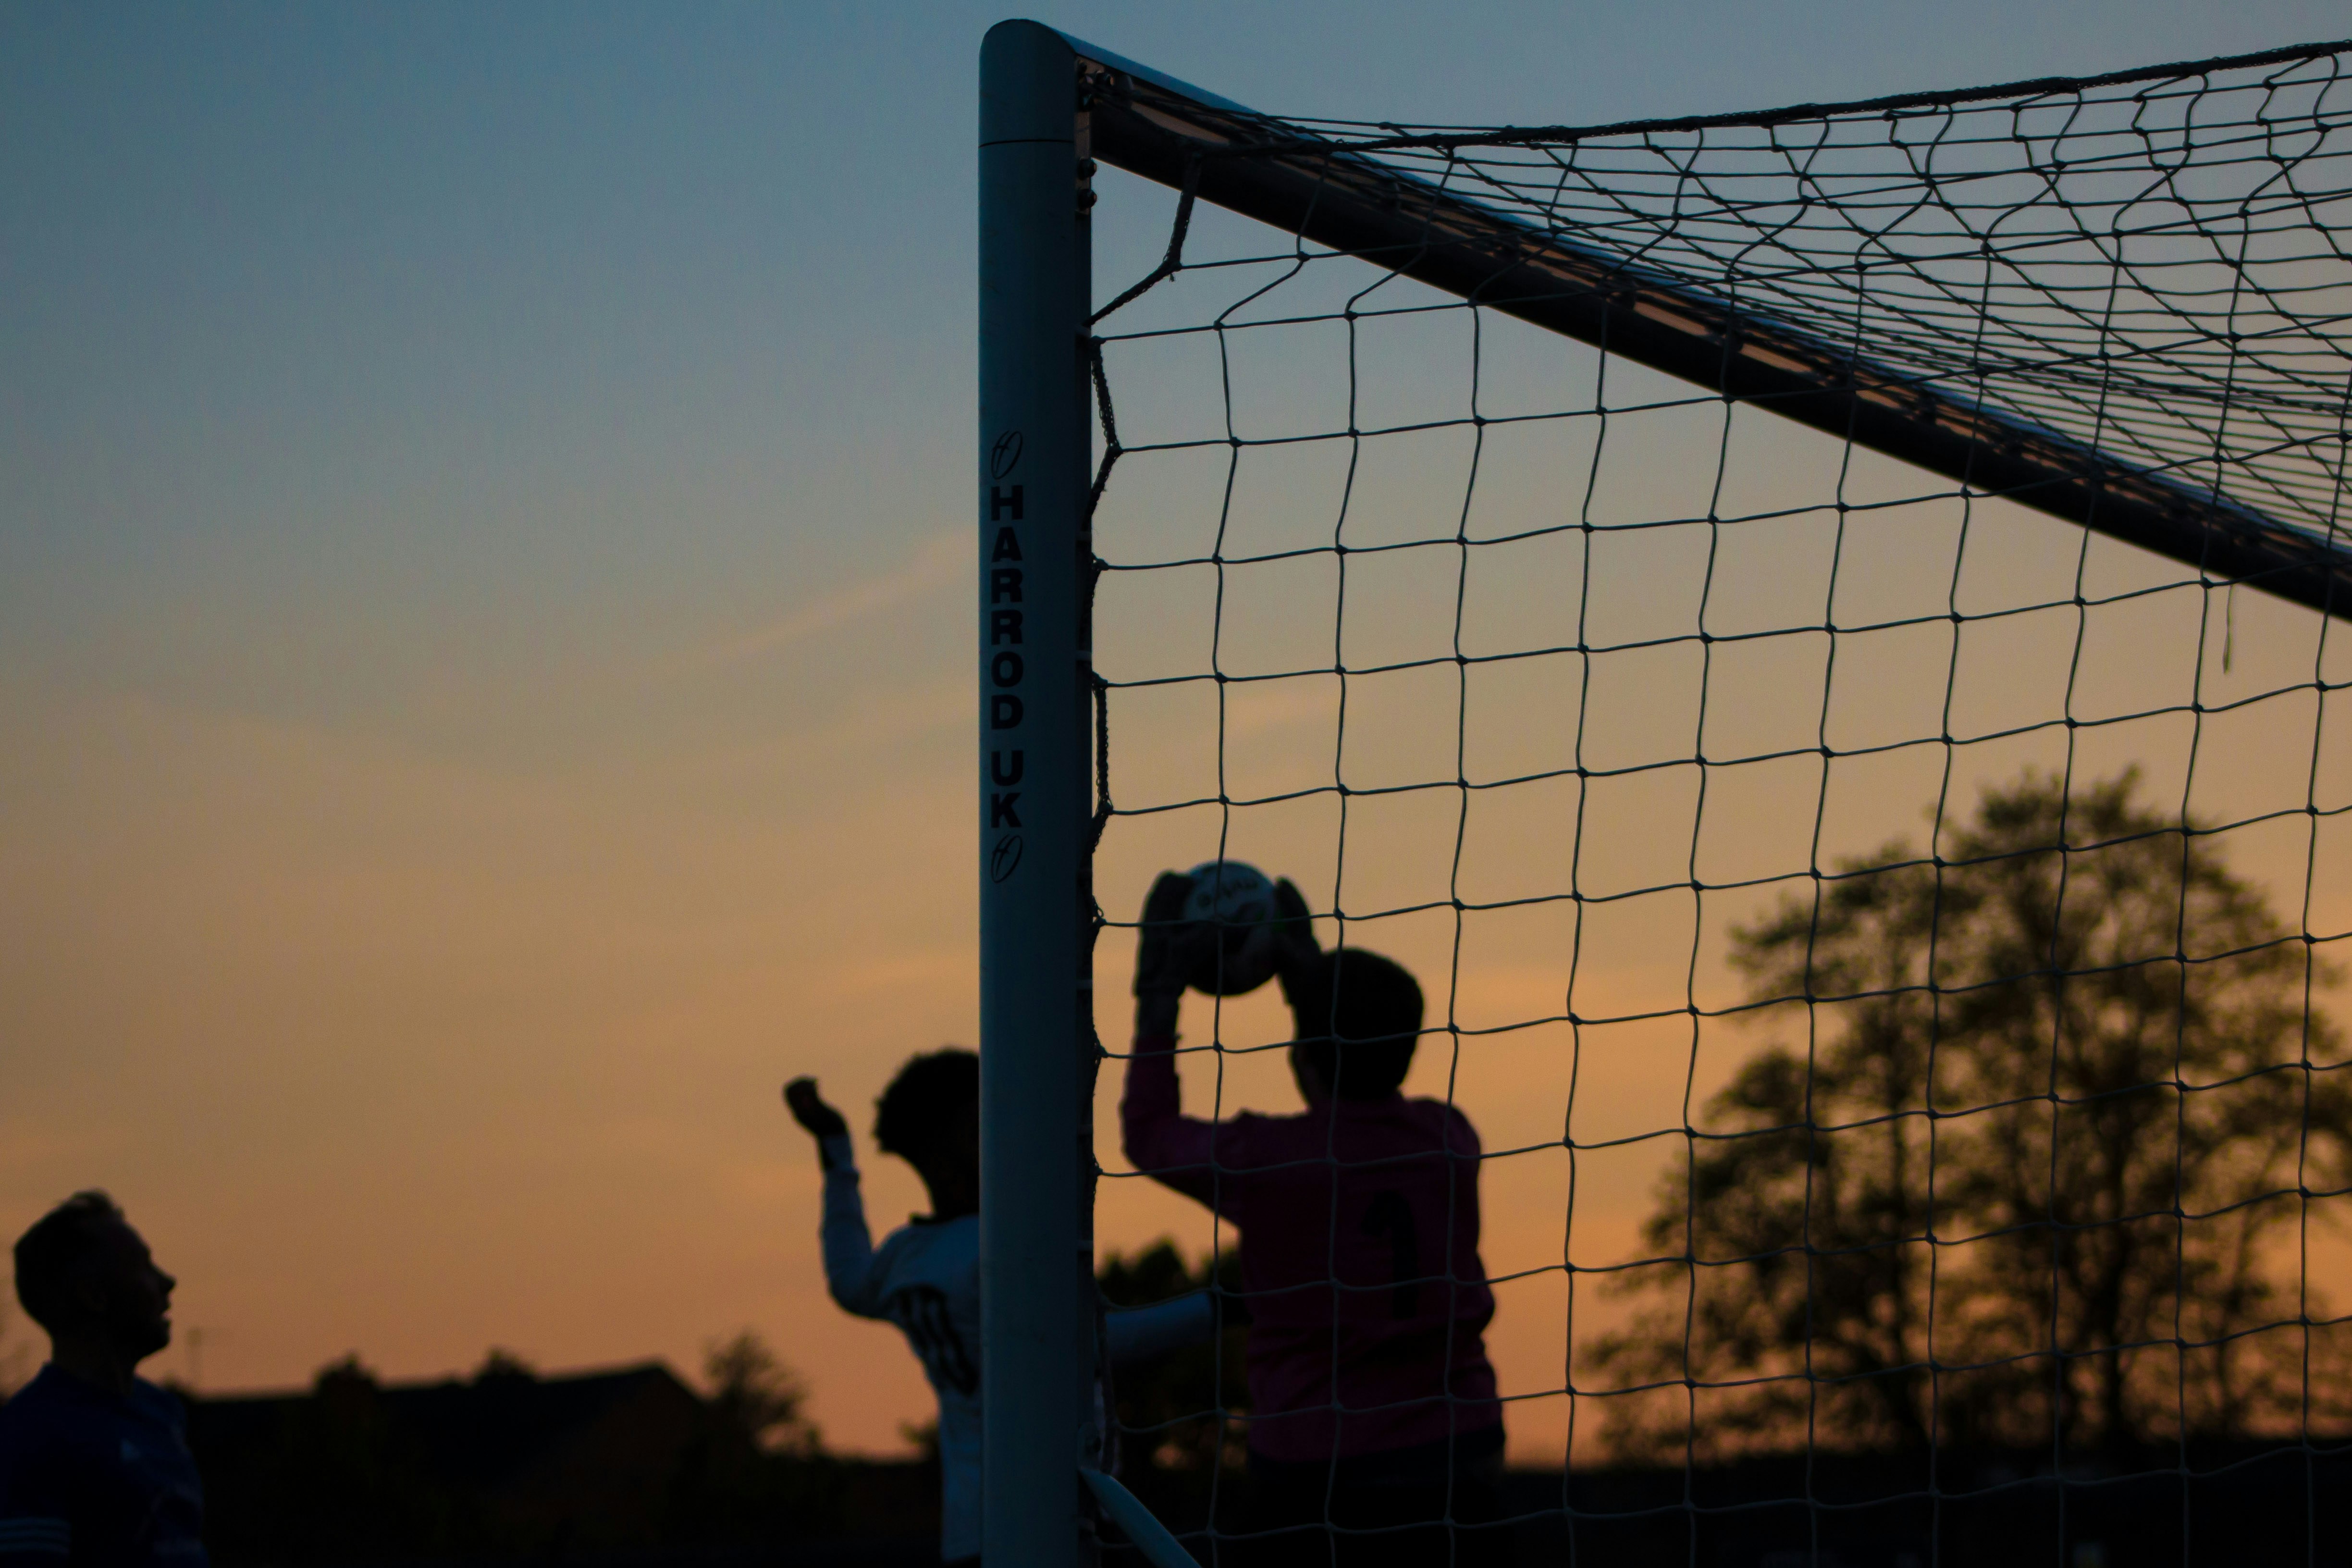 Silhouette goalkeeper catching the ball